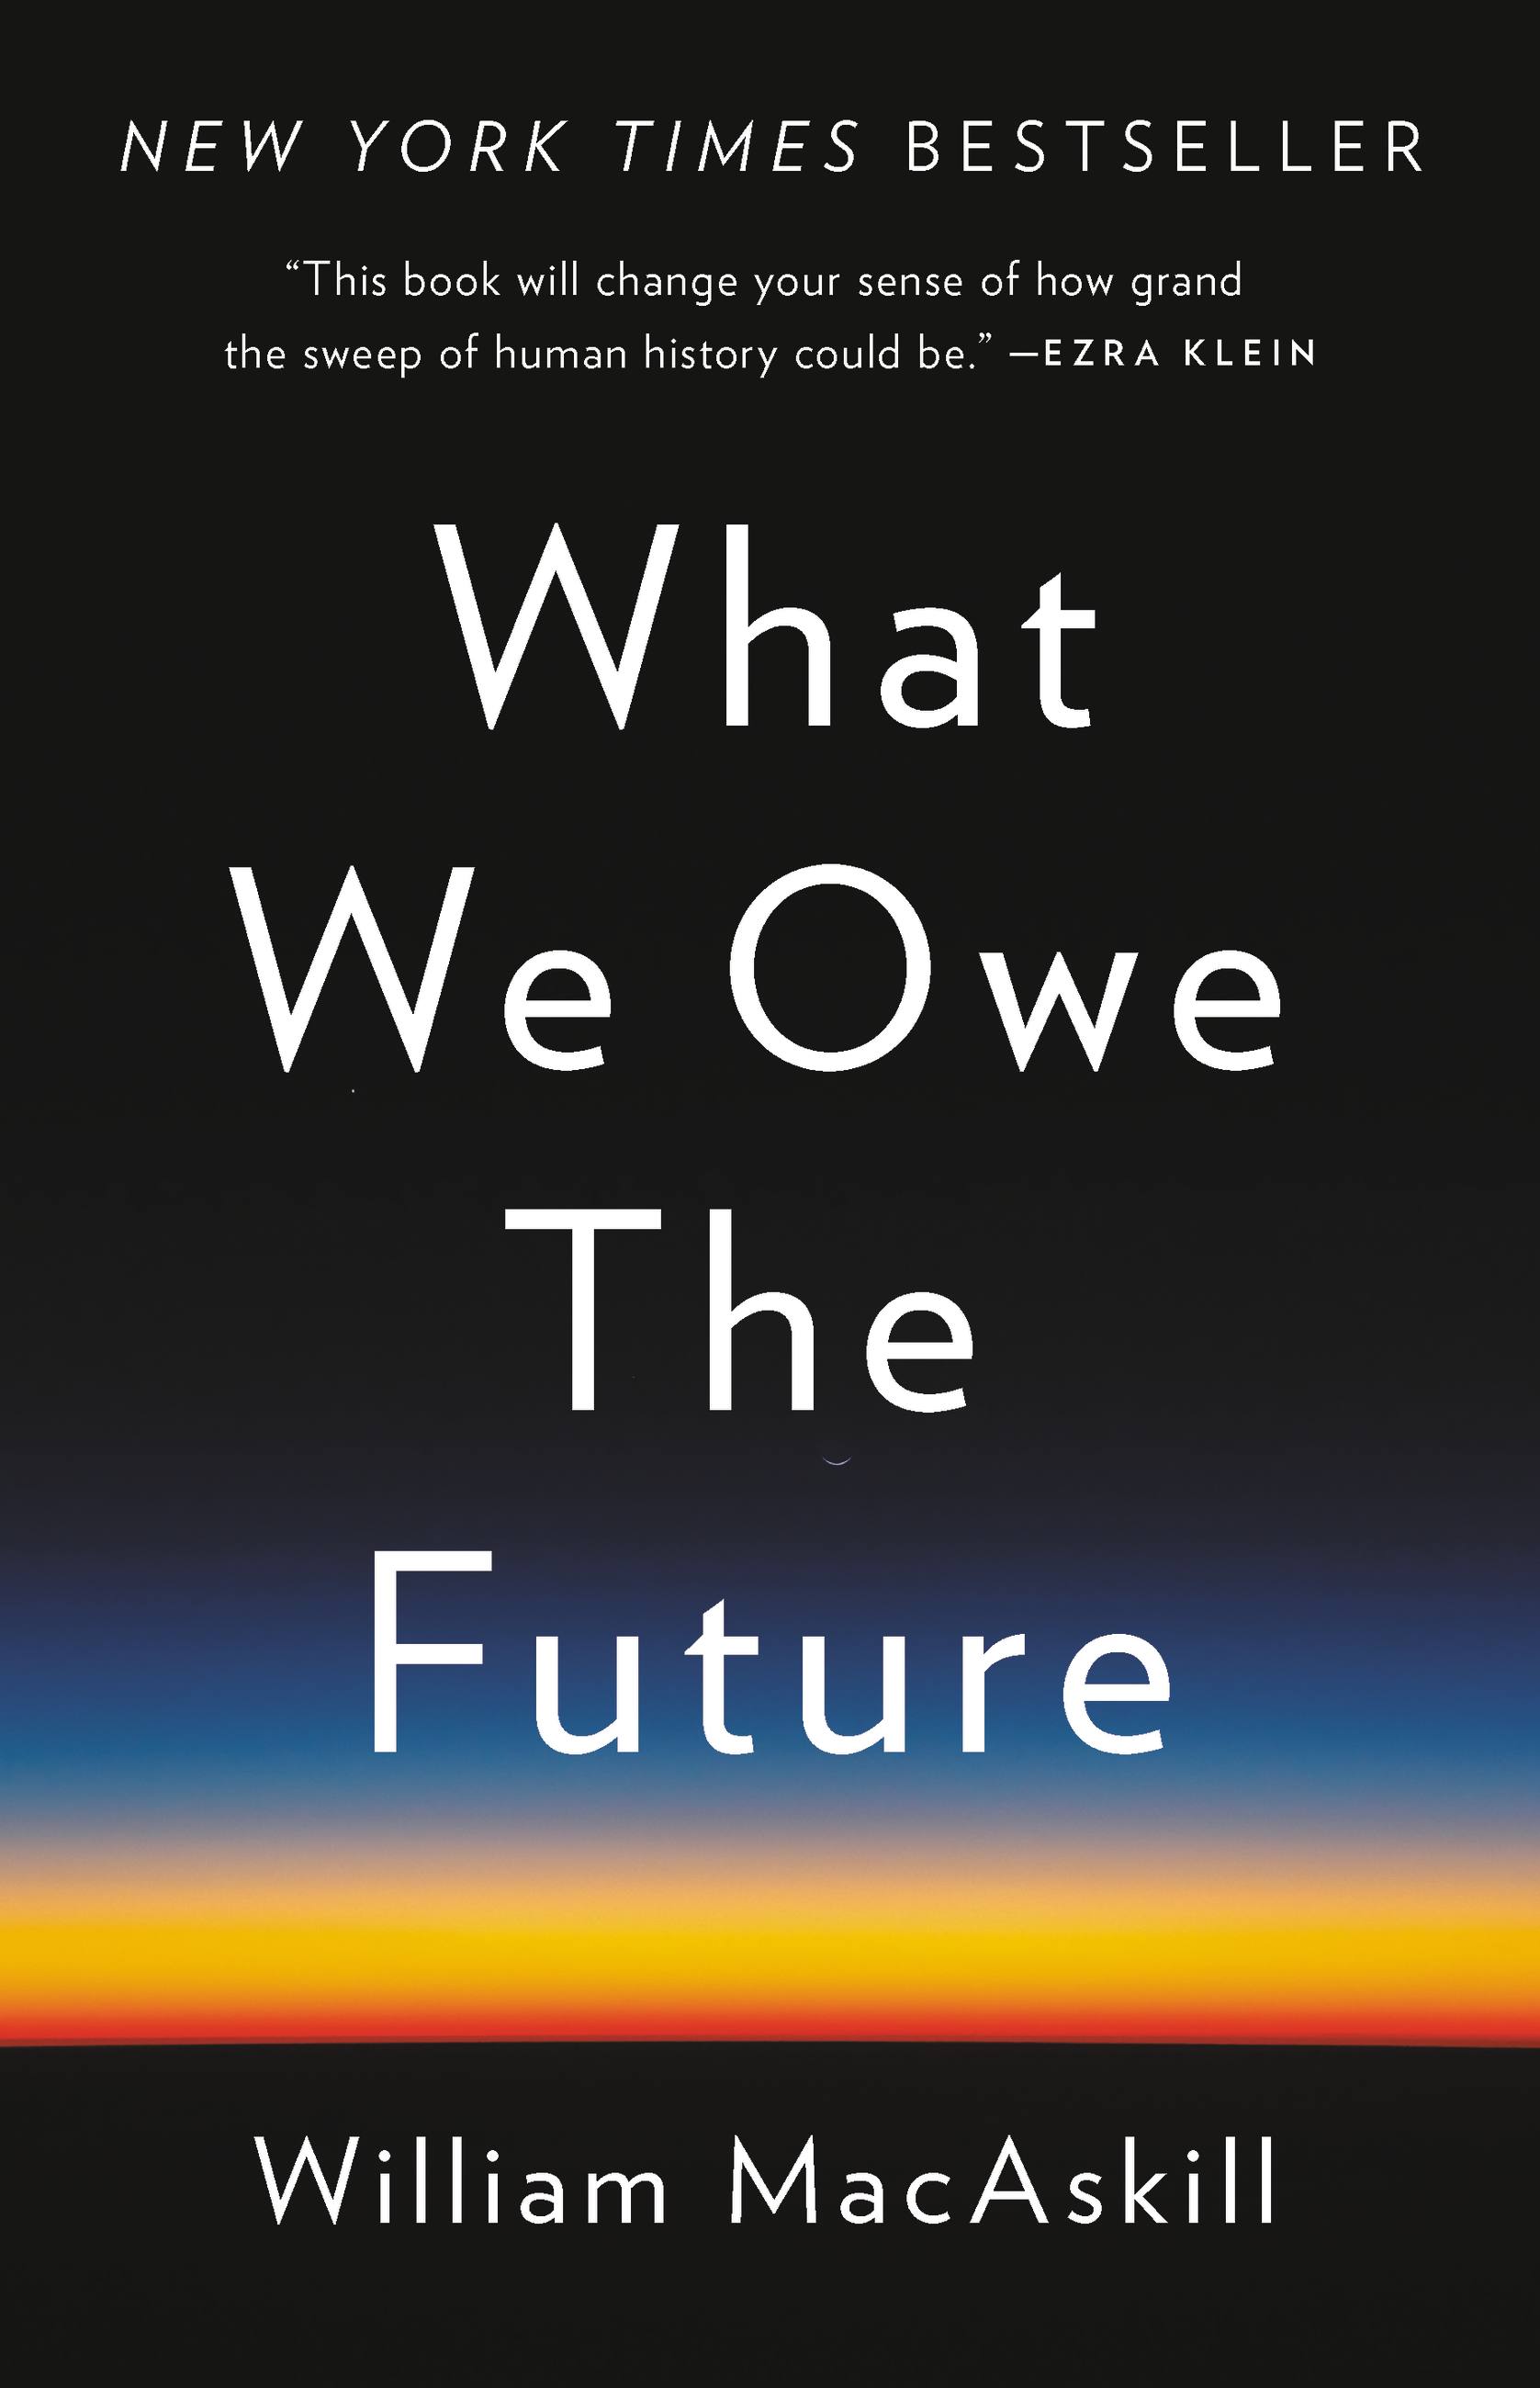 We　What　by　Owe　the　Future　William　MacAskill　Hachette　Book　Group